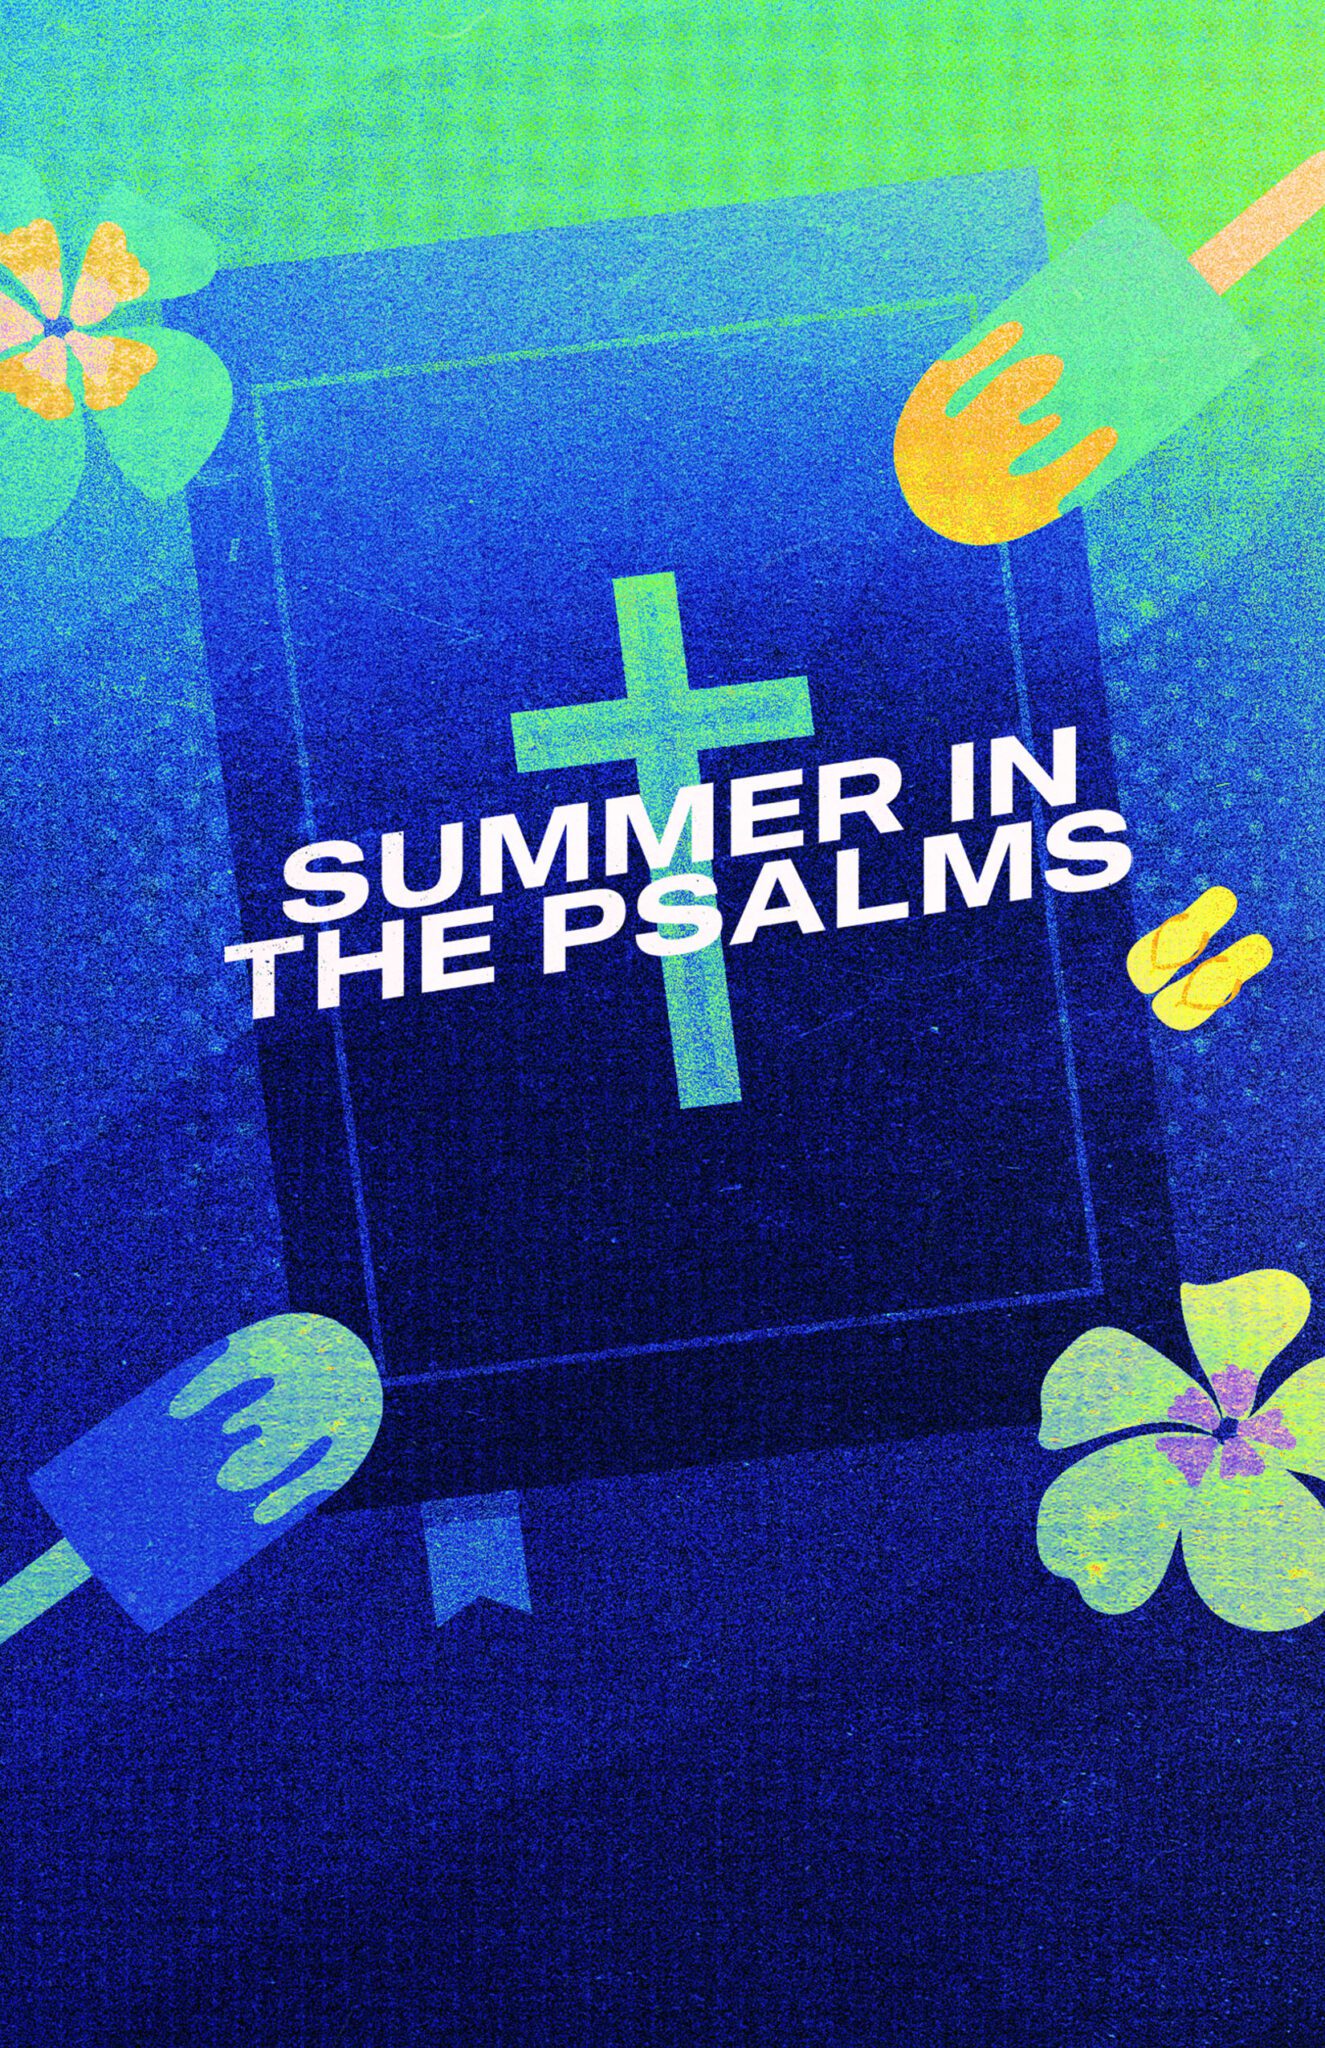 Summer in the Psalms: If God Does Not Build the House